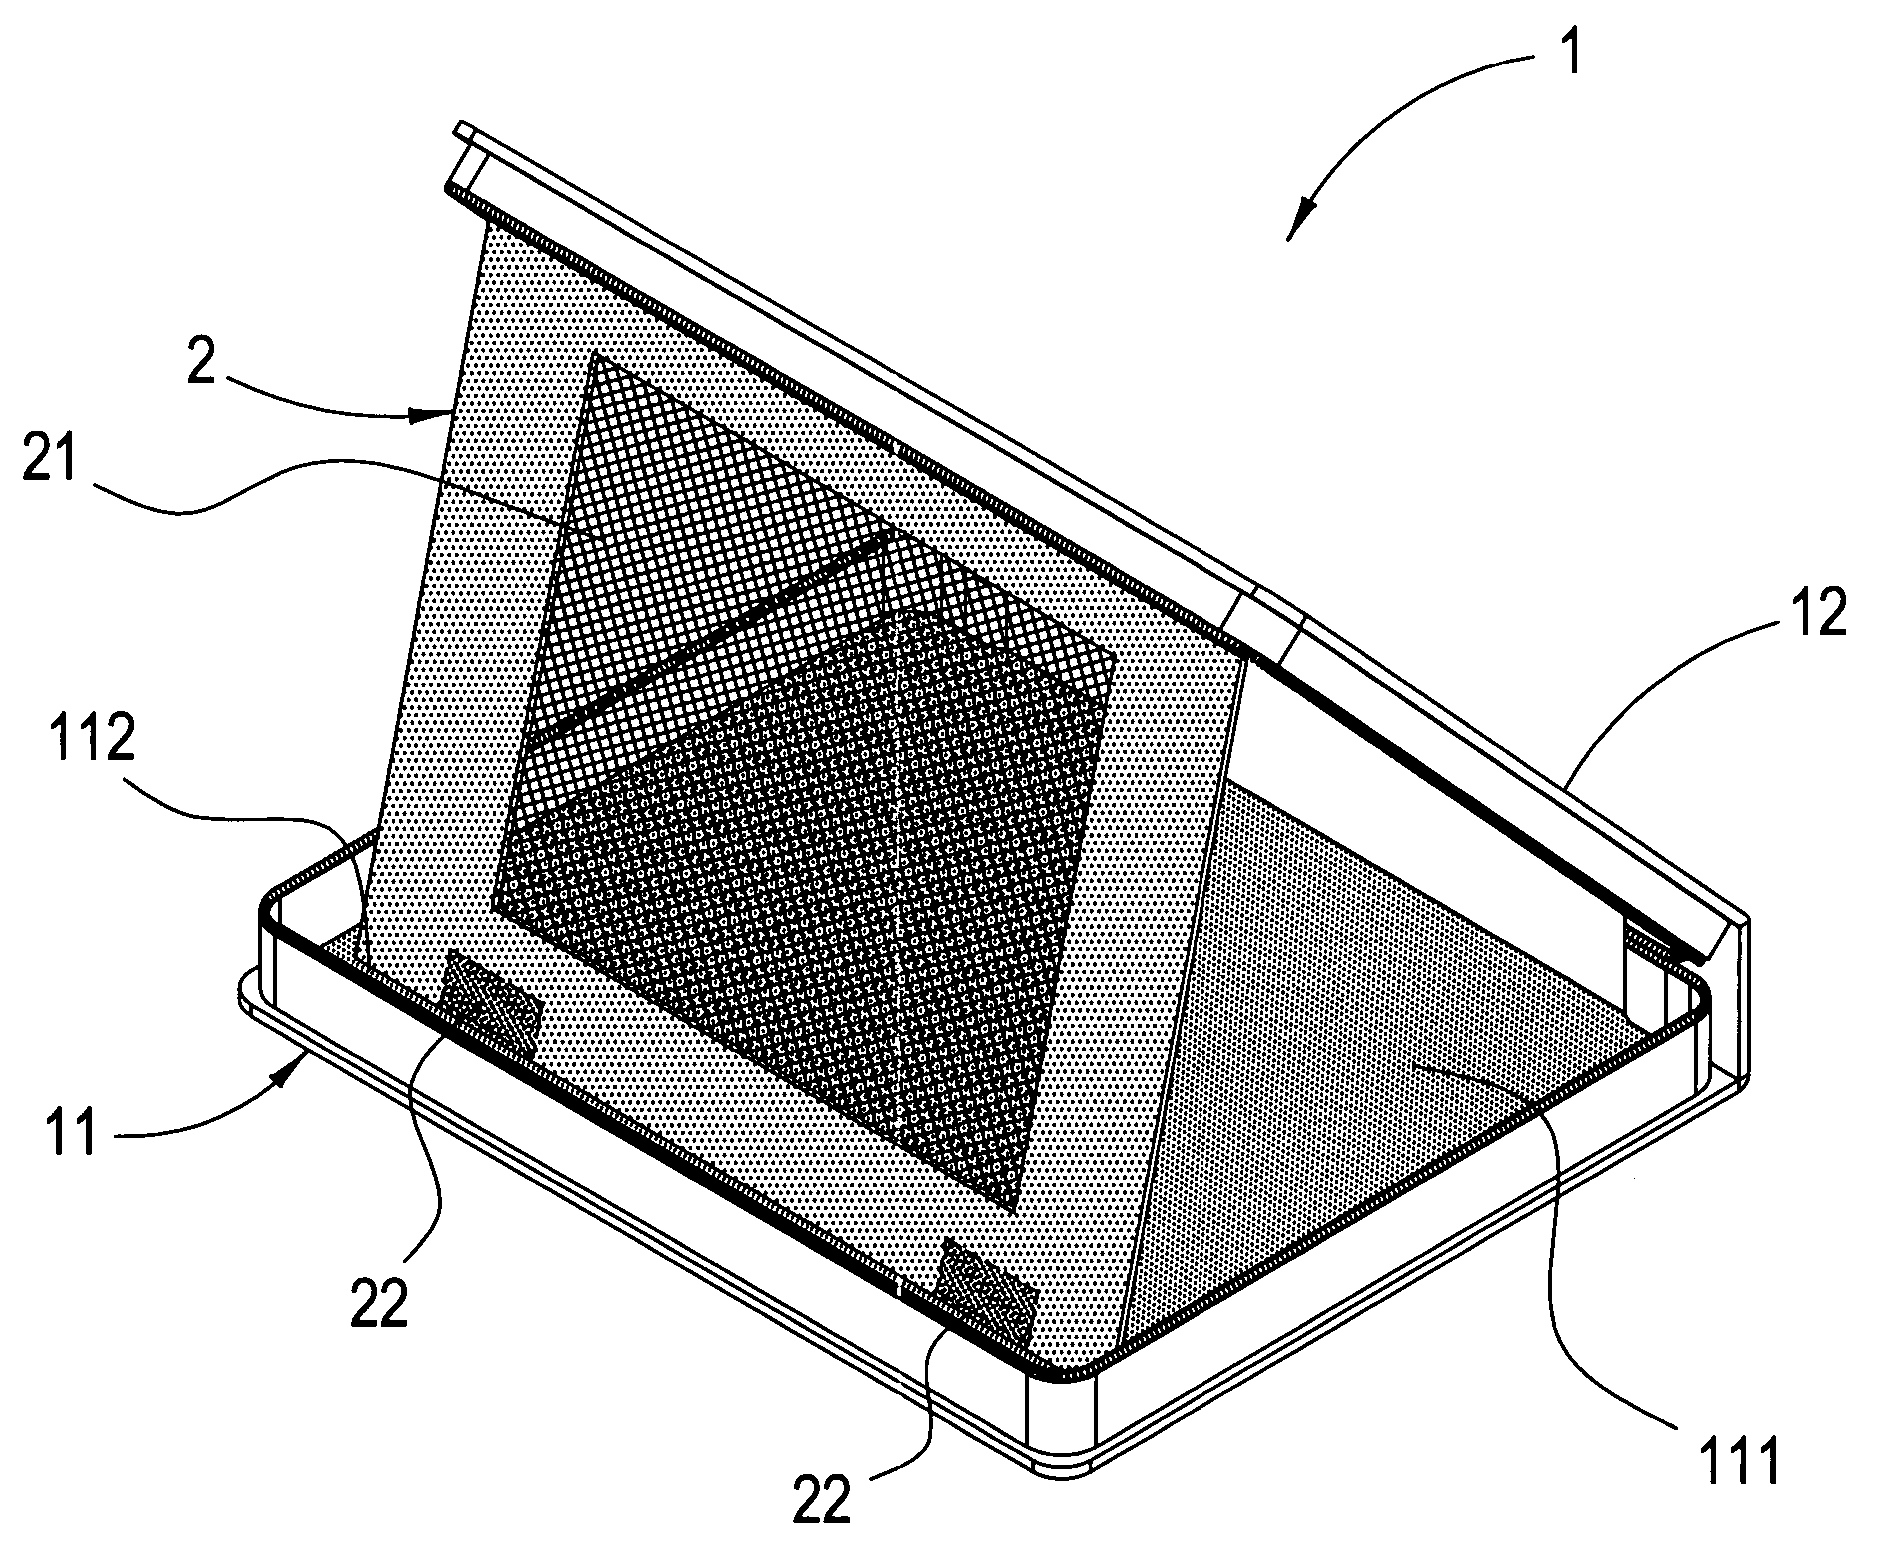 Protective sleeve structure for a portable electric product